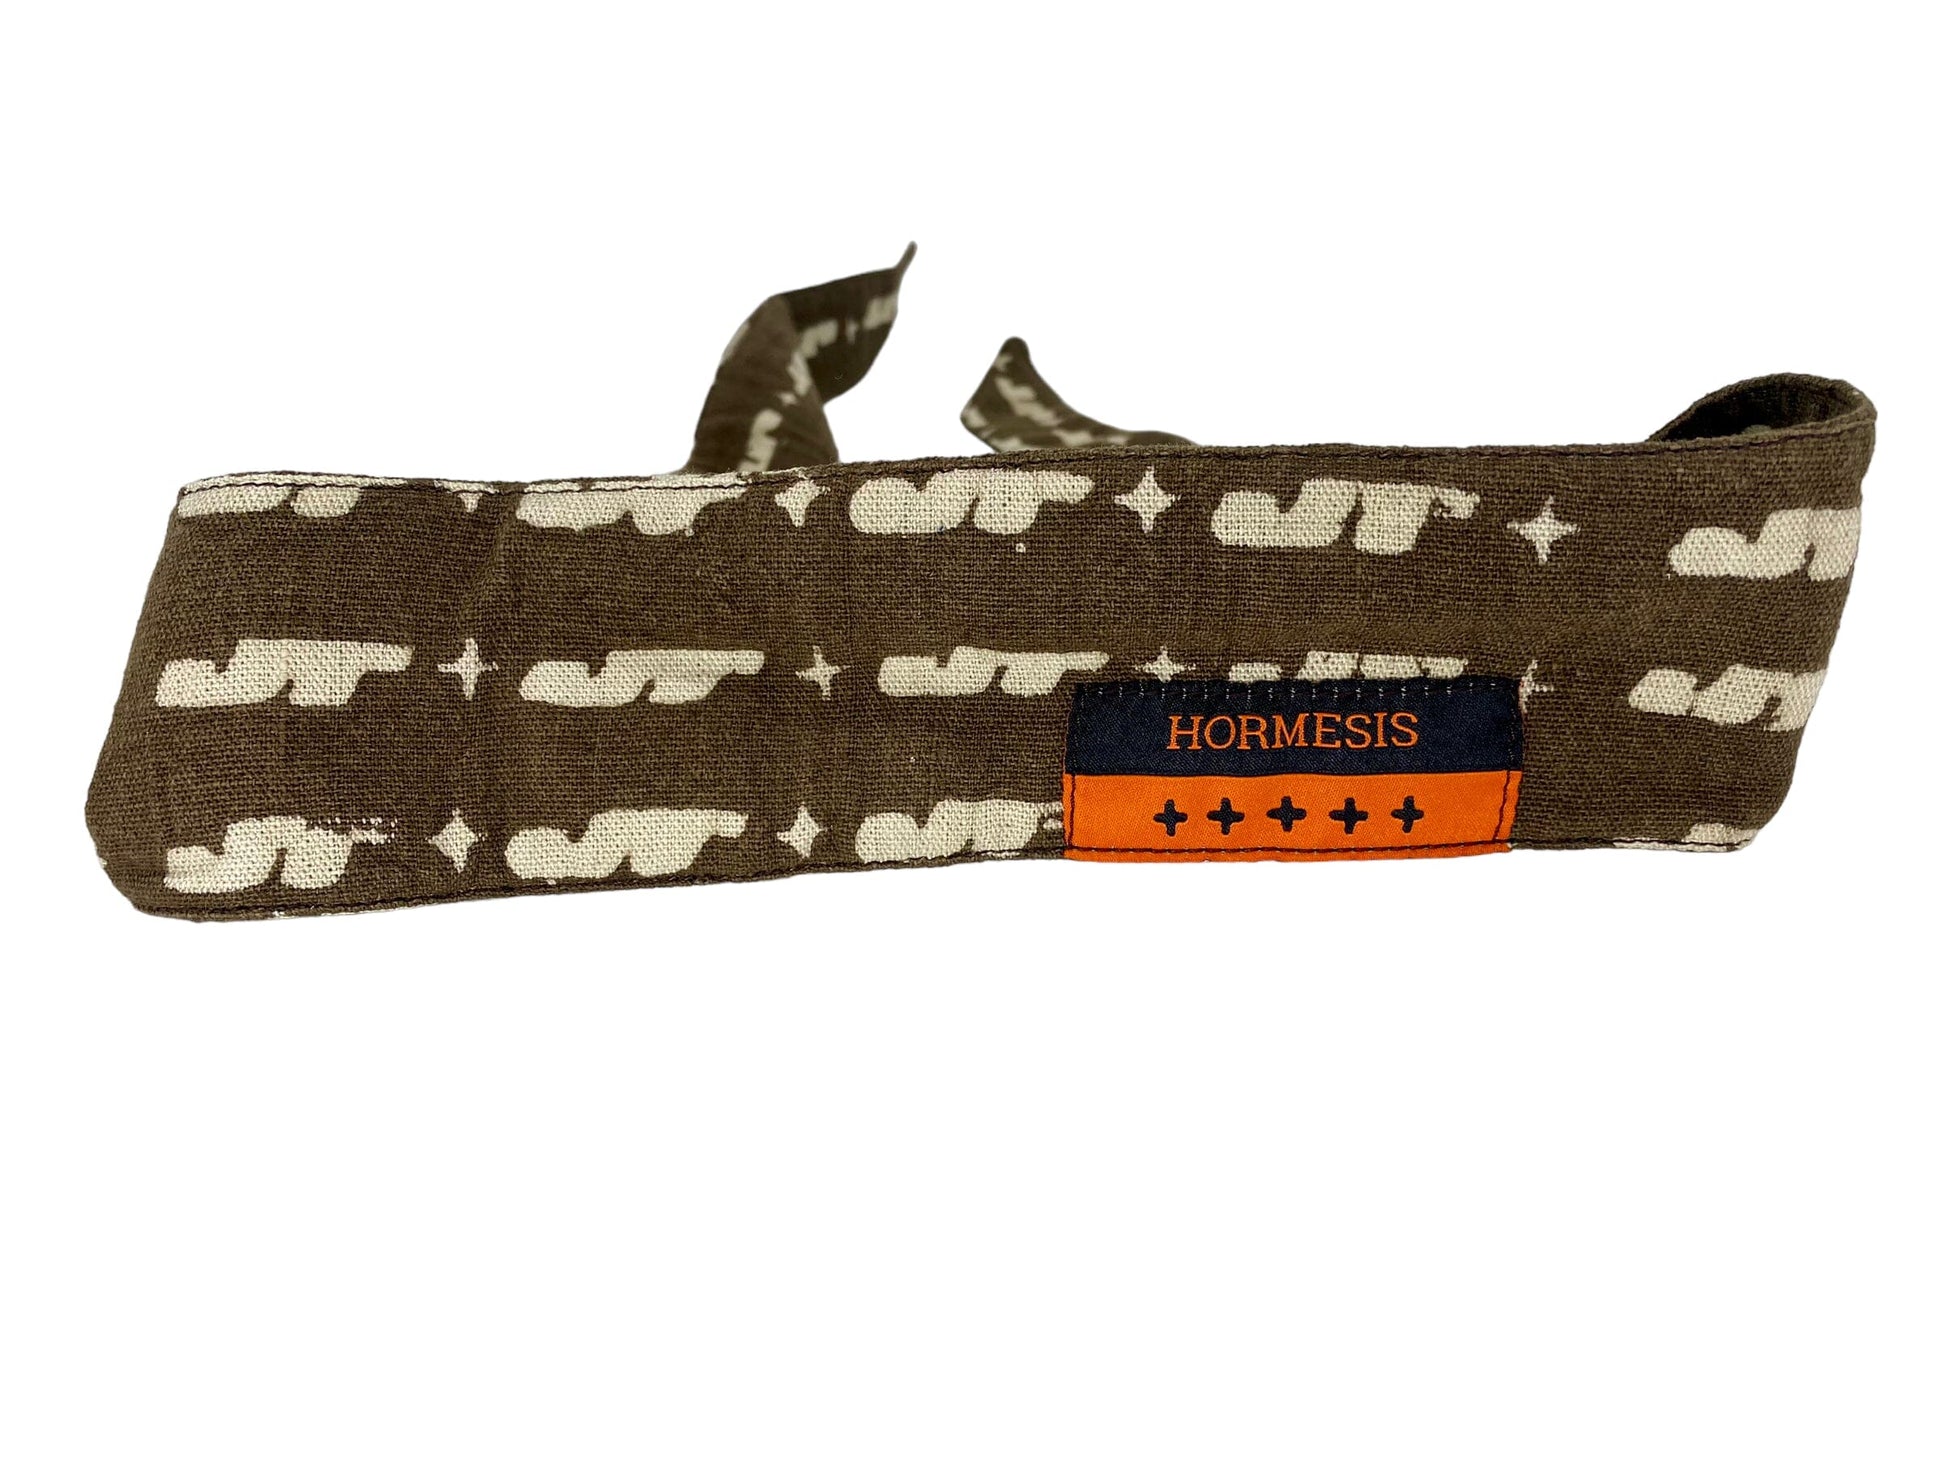 Used Hormesis Headband - The Brown JT Series - (137/159) Paintball Gun from CPXBrosPaintball Buy/Sell/Trade Paintball Markers, Paintball Hoppers, Paintball Masks, and Hormesis Headbands